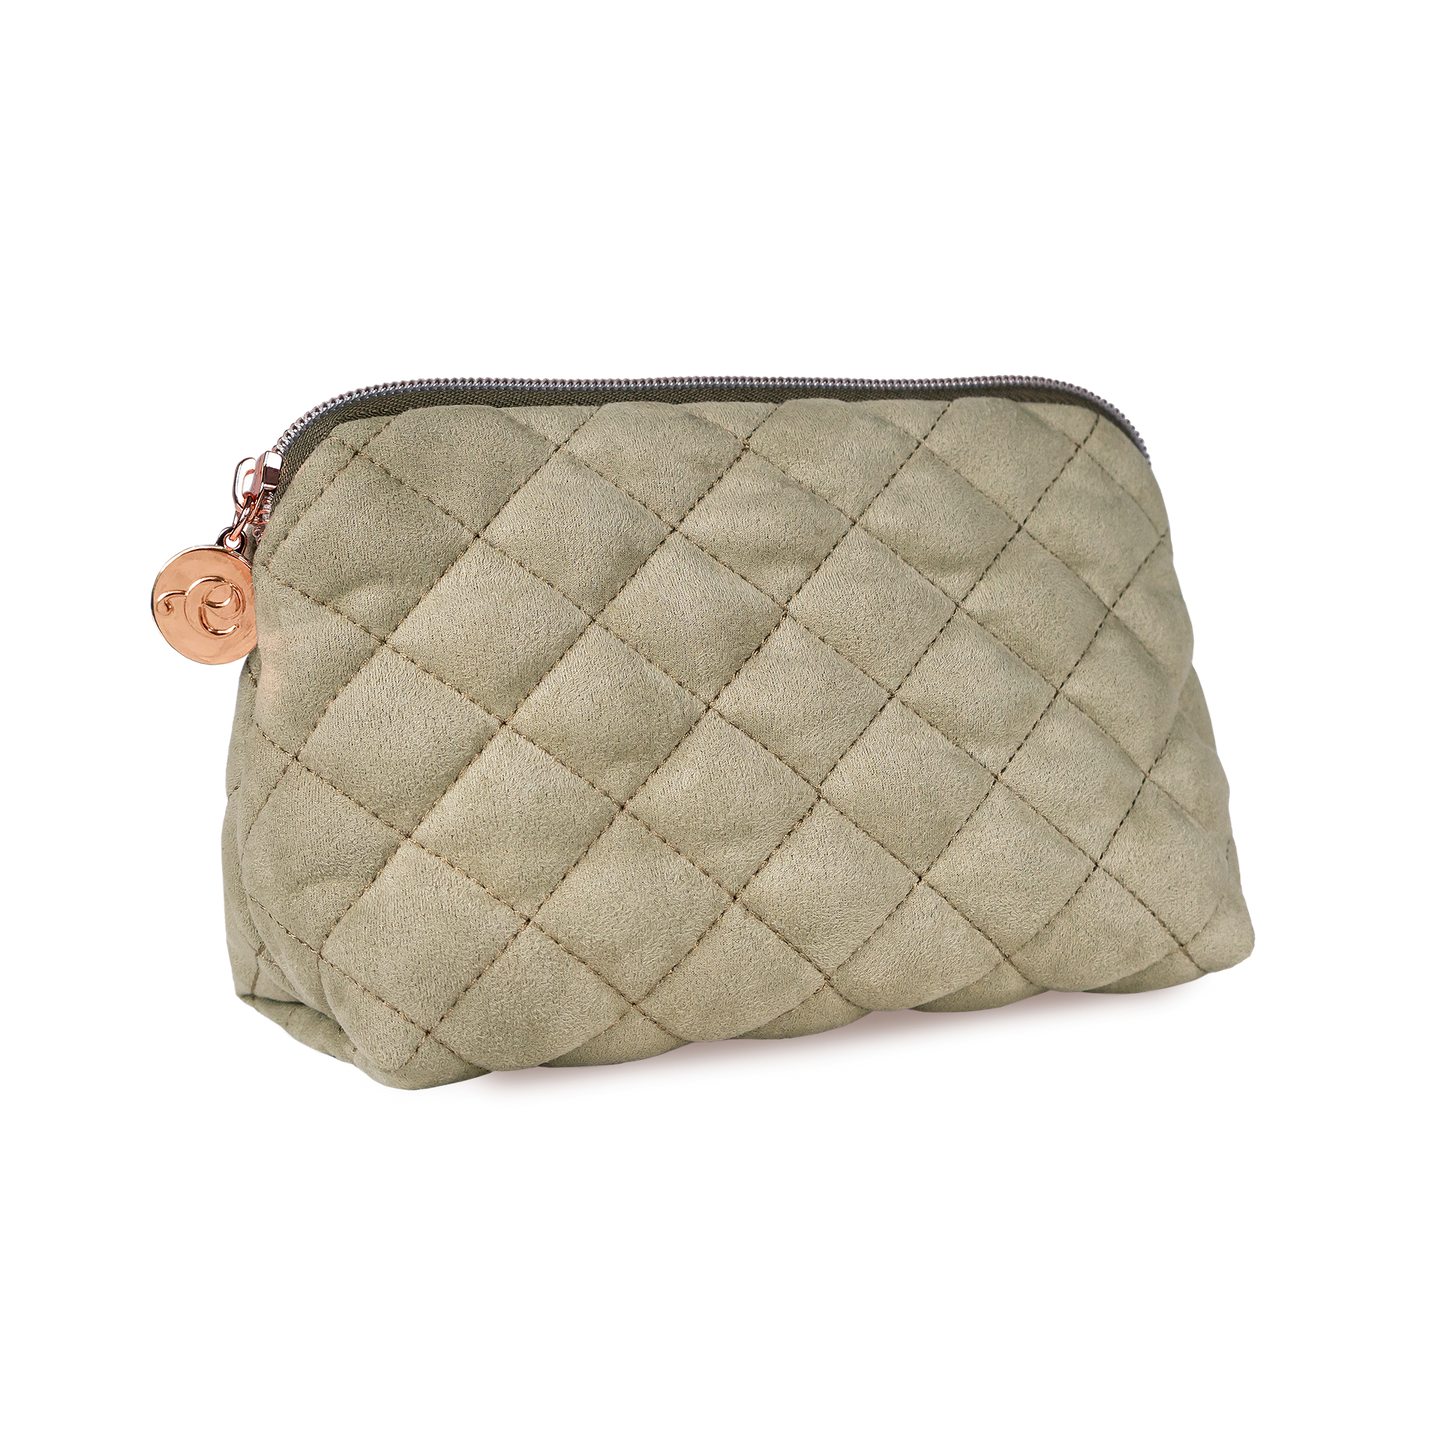 Chanel Quilted Toiletry Pouch - Black Cosmetic Bags, Accessories